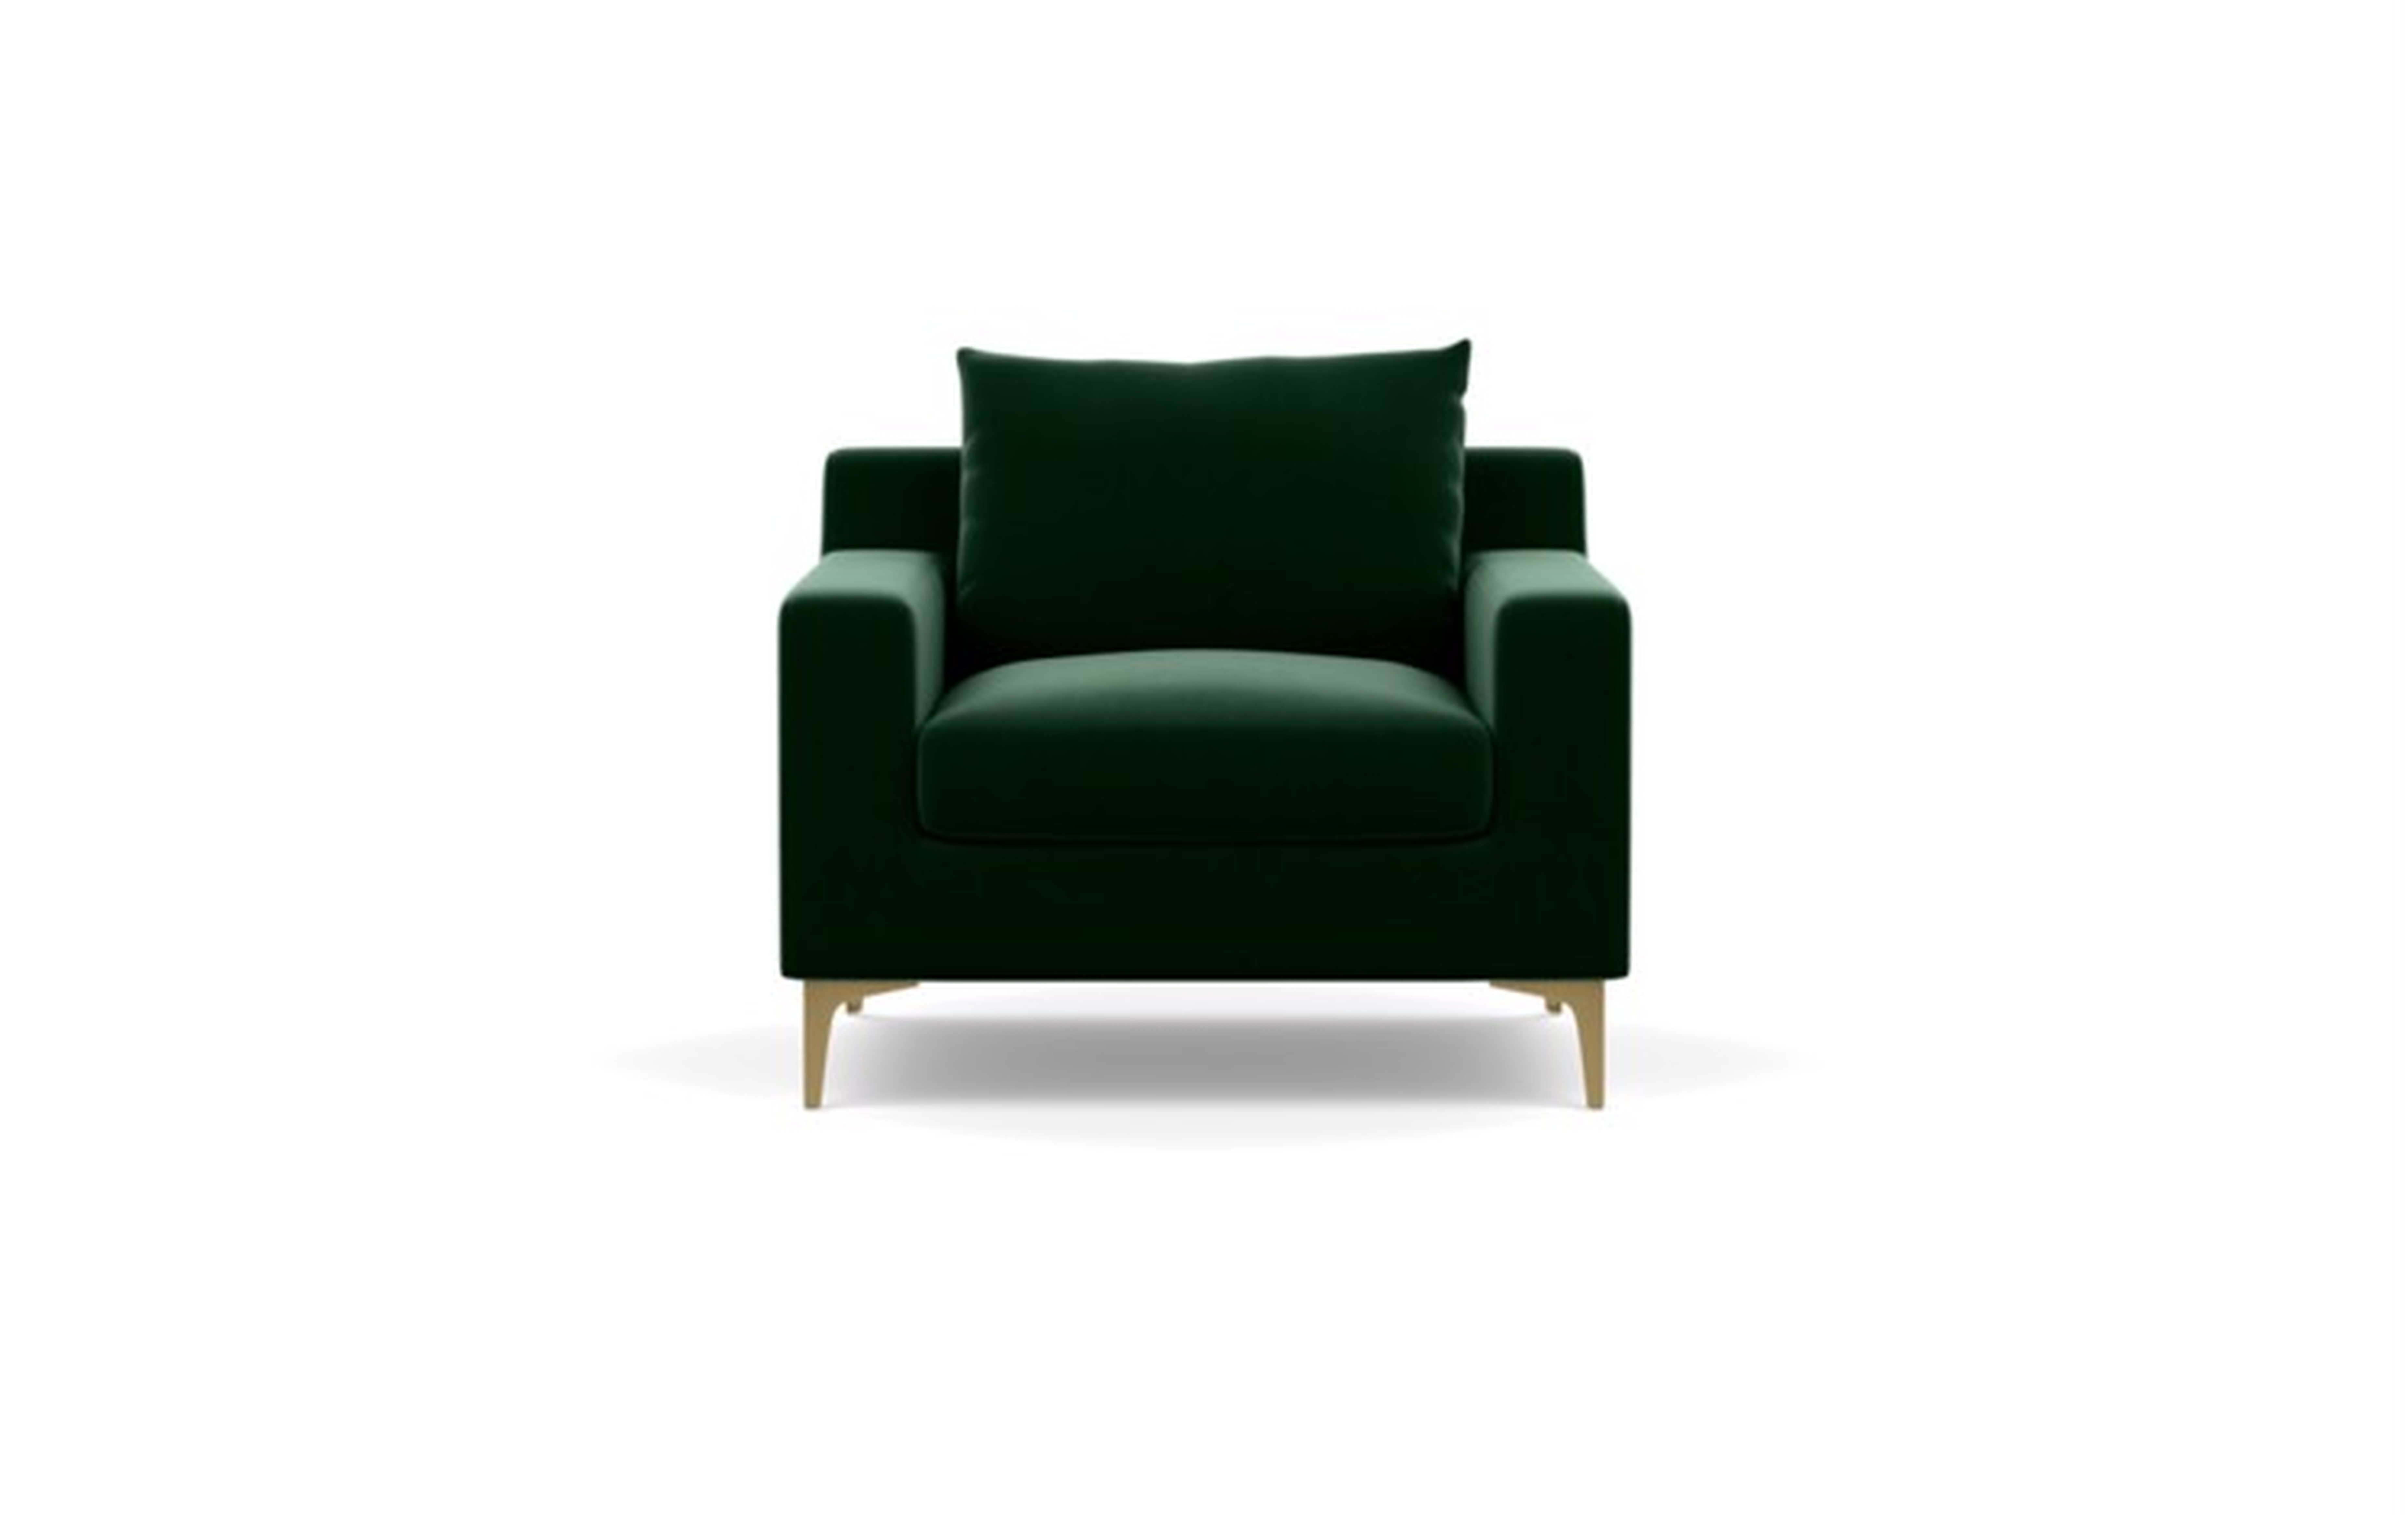 Sloan Chairs in Emerald Fabric withBrass Plated Sloan L Leg - Interior Define